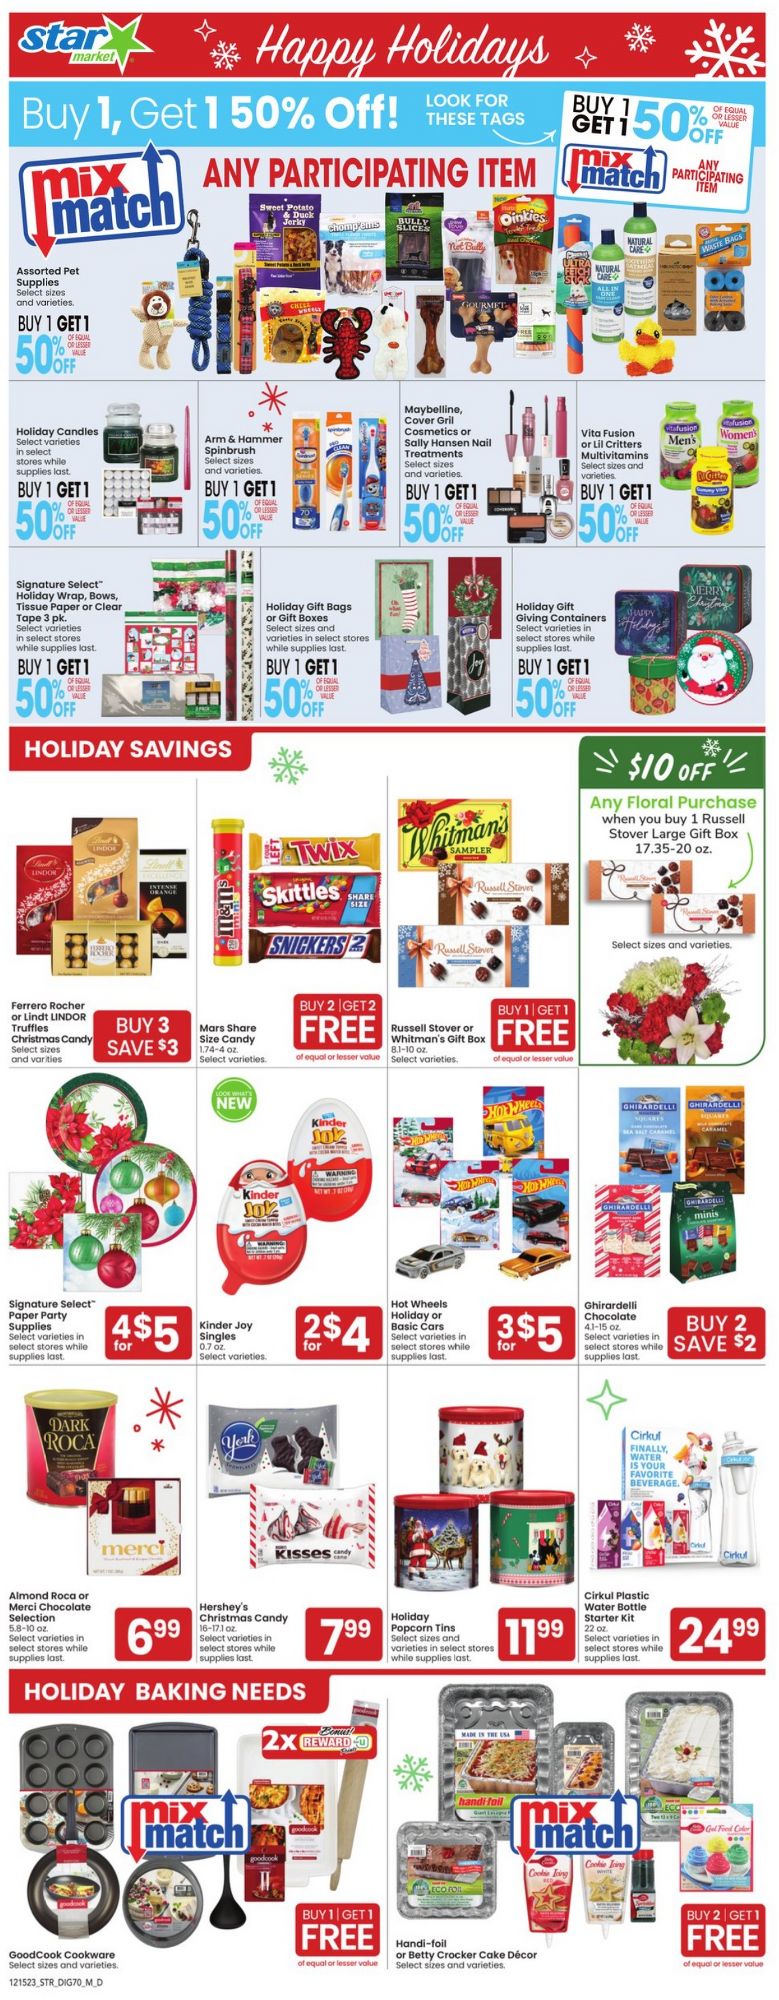 Star Market Christmas July 2024 Weekly Sales, Deals, Discounts and Digital Coupons.